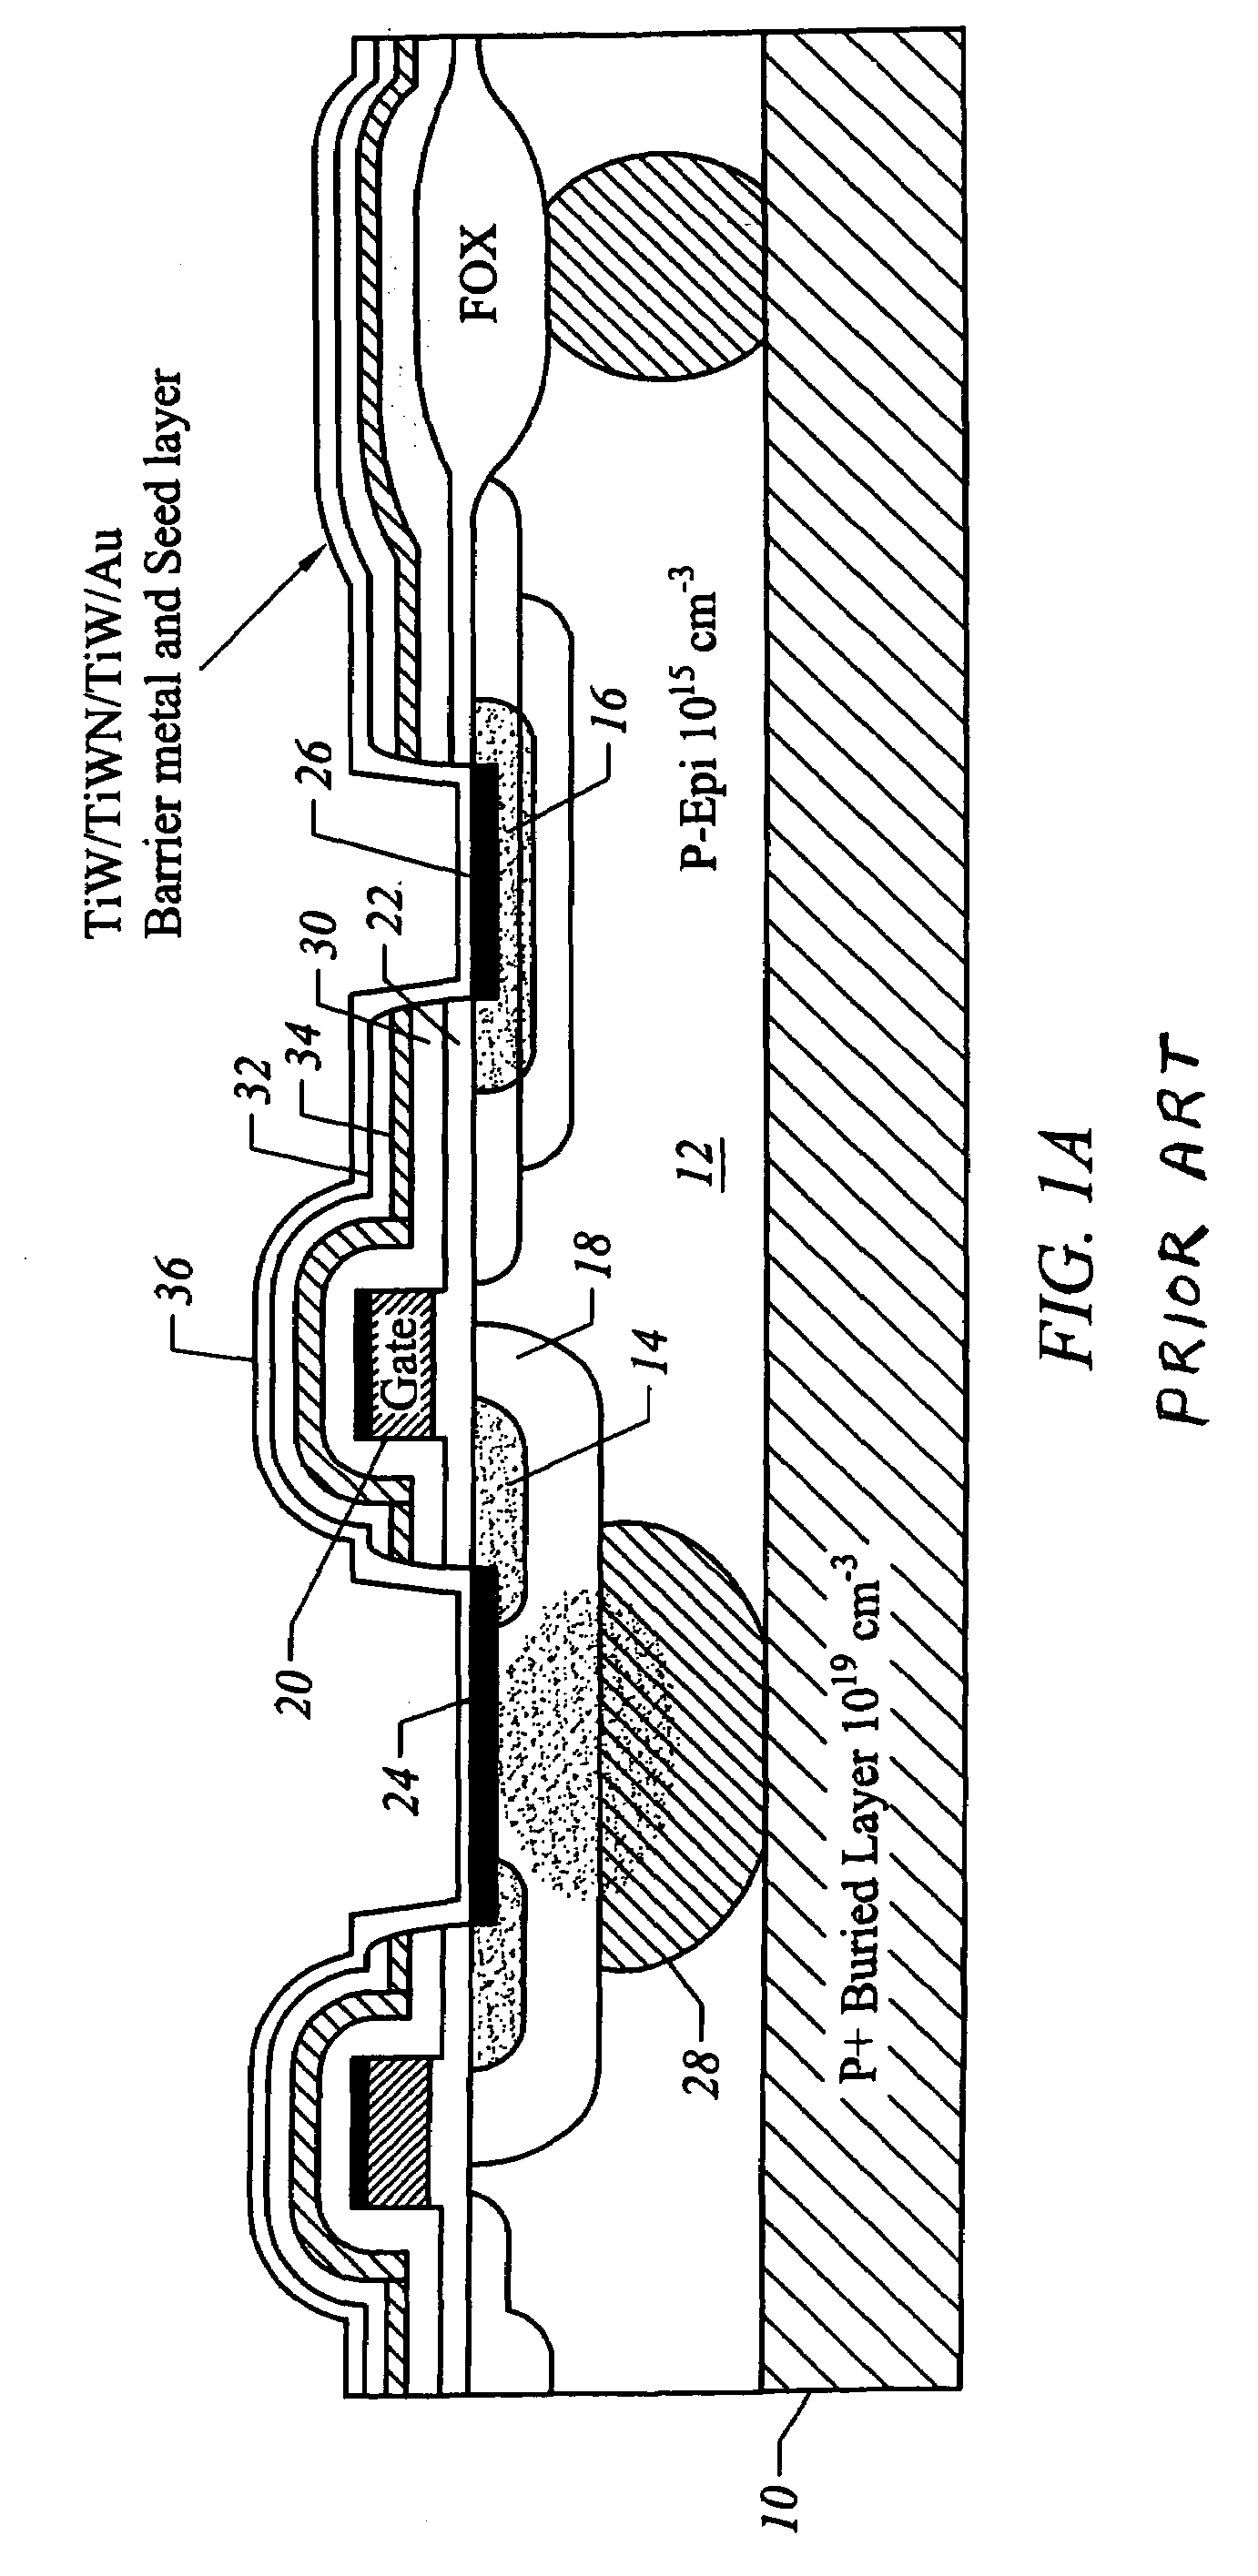 LDMOS transistor with improved gate shield